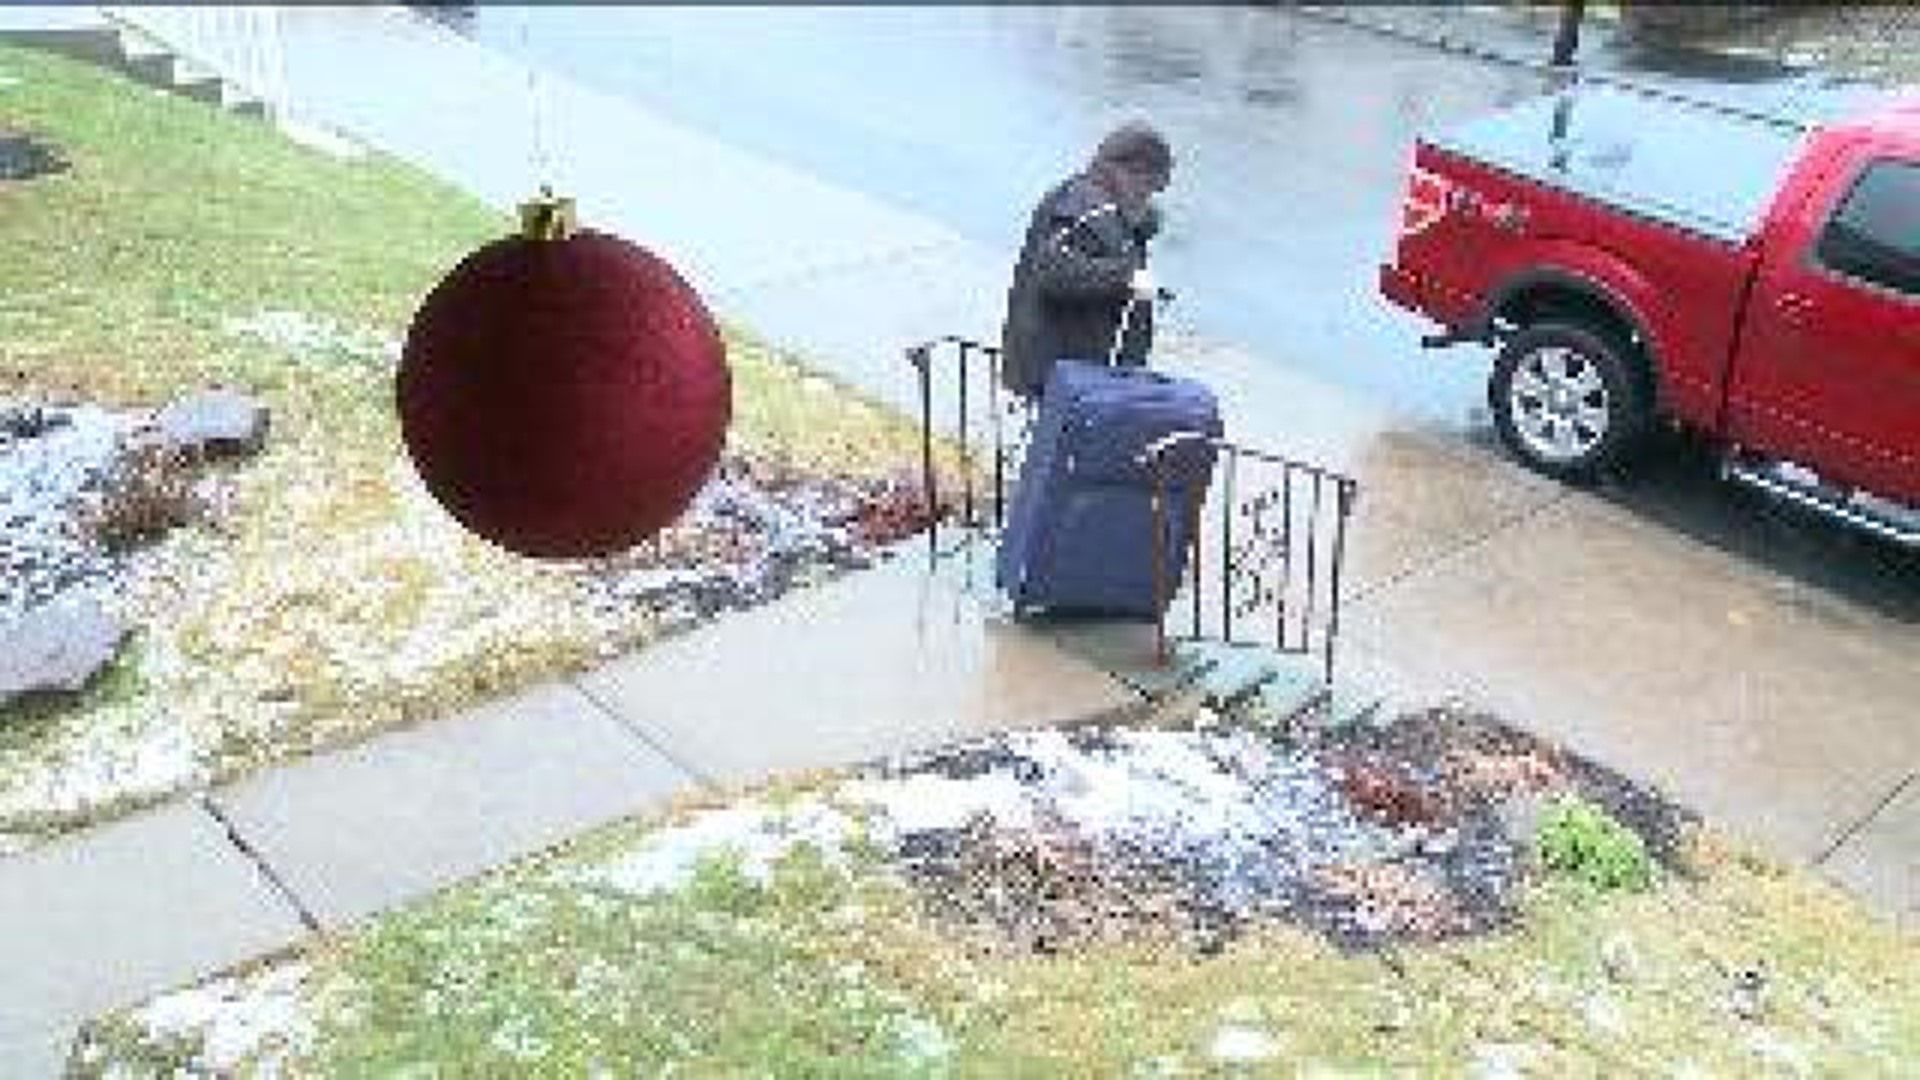 Suitcase Allegedly Stolen From Autistic Child